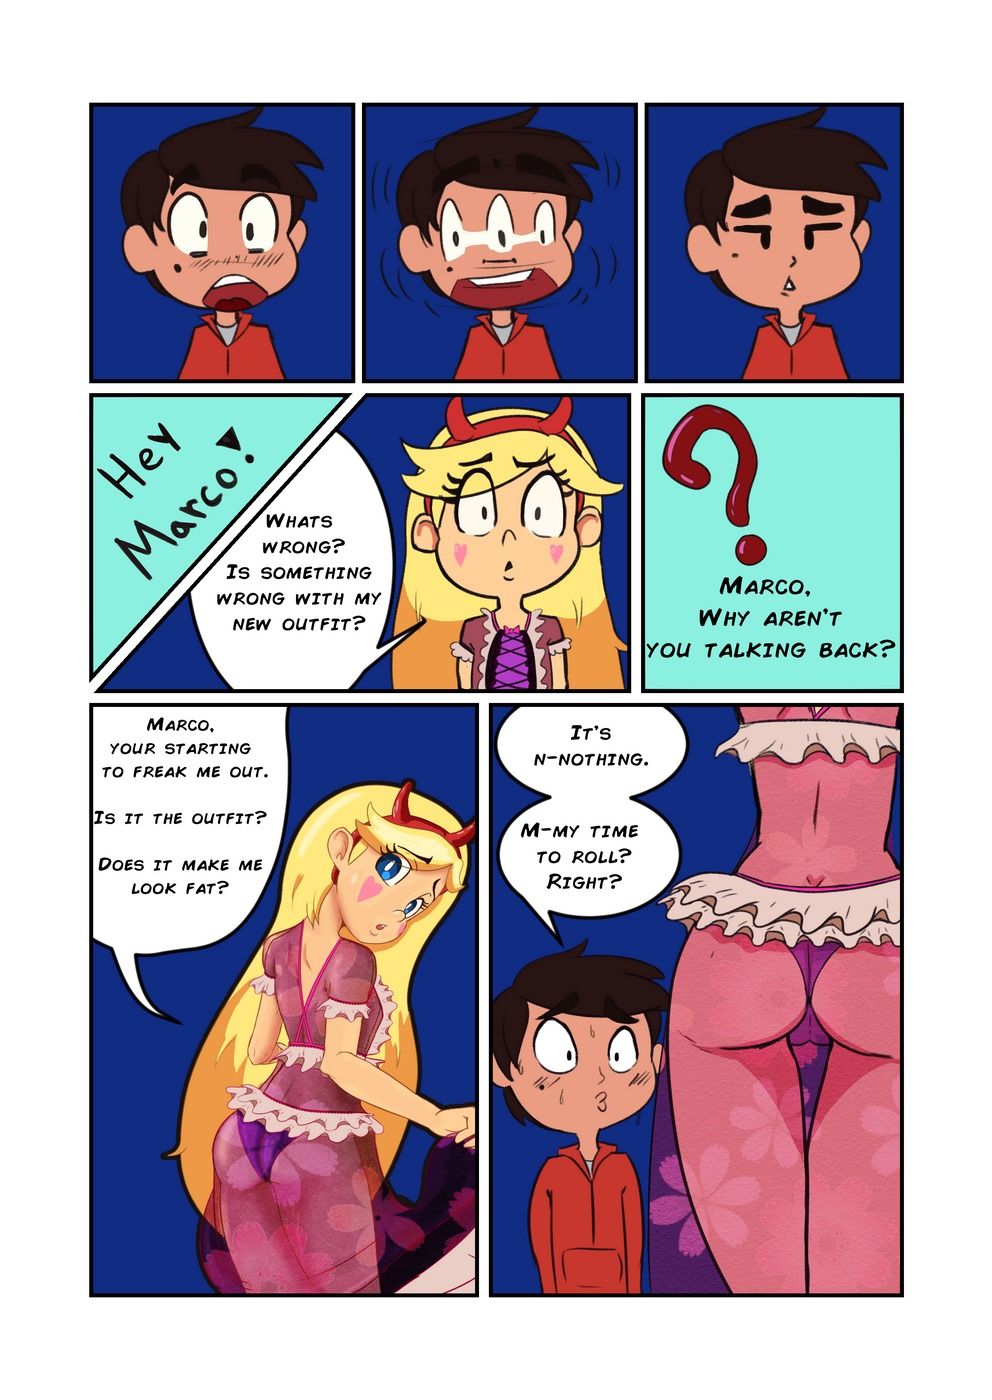 [Honeyshot] Star Vs The Forces Of Evil - Stars Board Game page 9